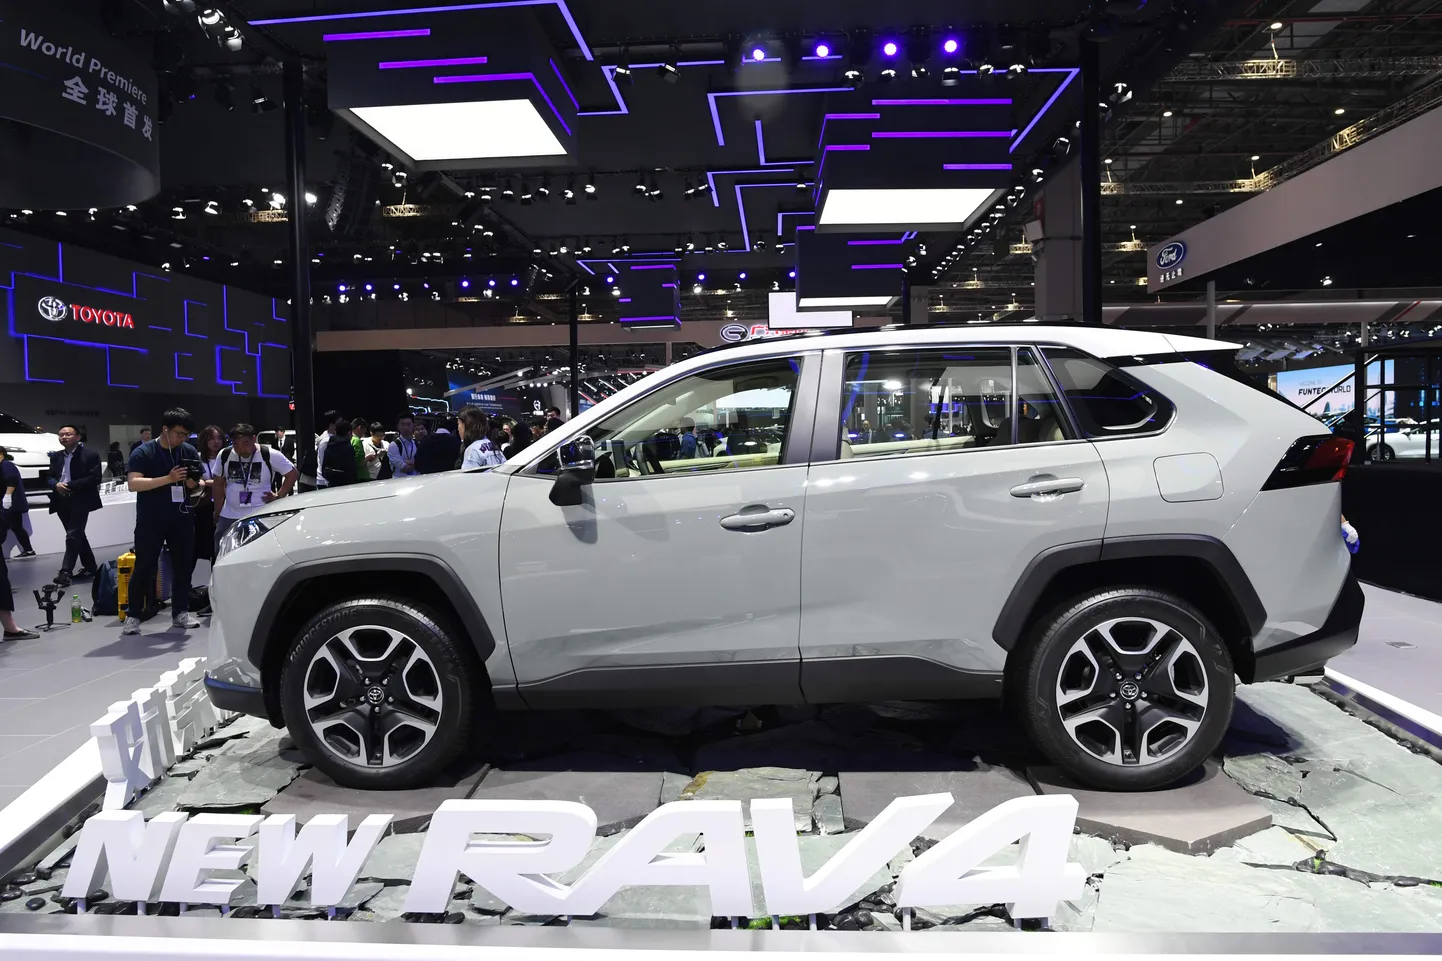 A Toyota Rav4 is displayed on the opening day of the Shanghai Auto Show in Shanghai on April 16, 2019. - Global car makers flock to the Shanghai Auto Show this week with the world's largest vehicle market facing an unfamiliar sales slump just as China veers toward an ultra-competitive electric future. (Photo by GREG BAKER / AFP)